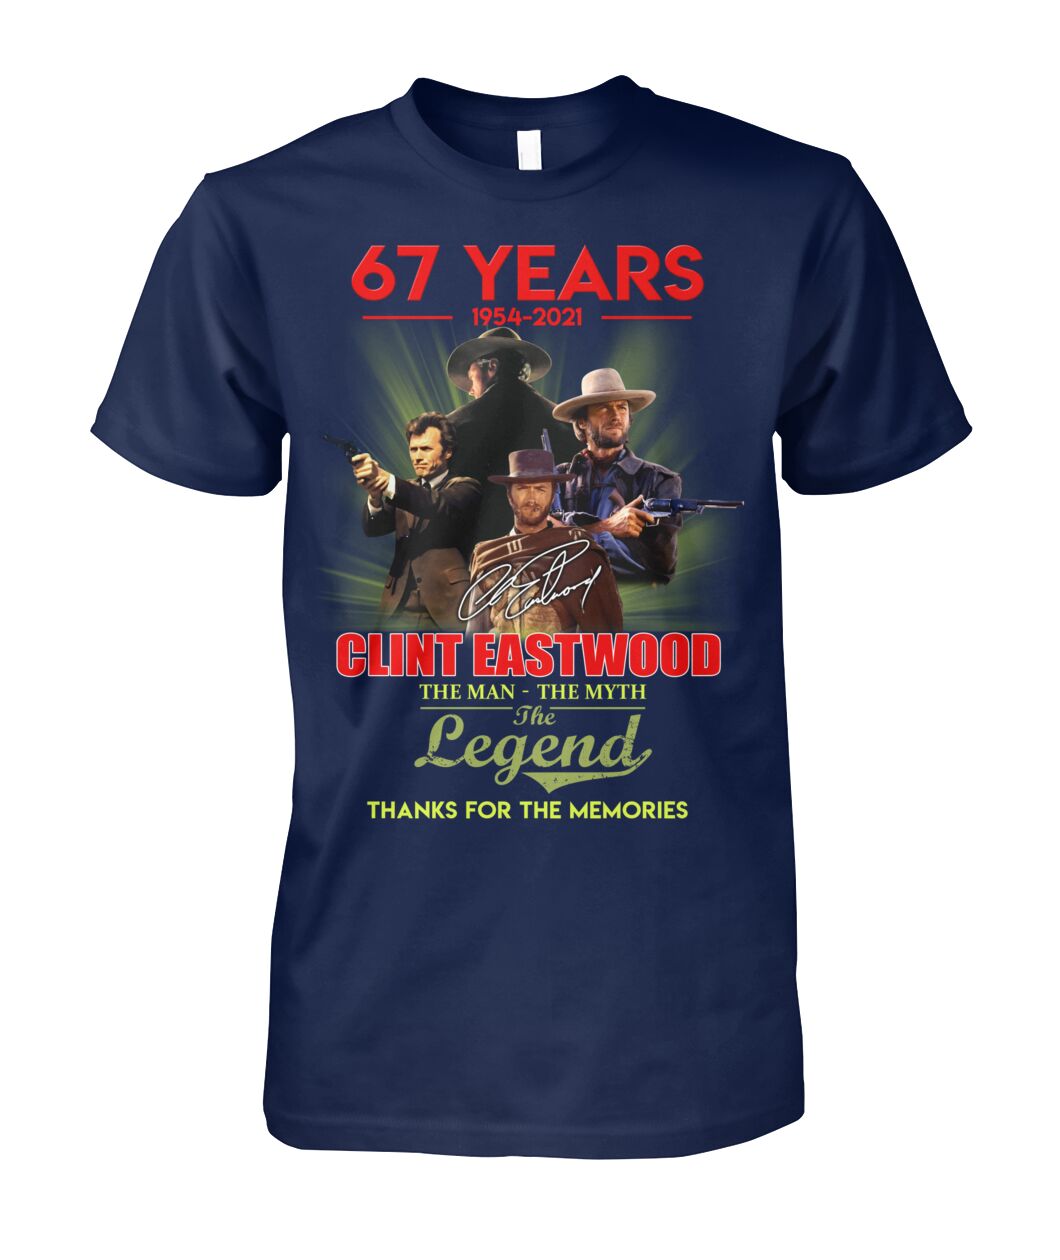 67 years 1954 2021 Clint Eastwood The man the myth the legend shirt, hoodie and sweatshirt